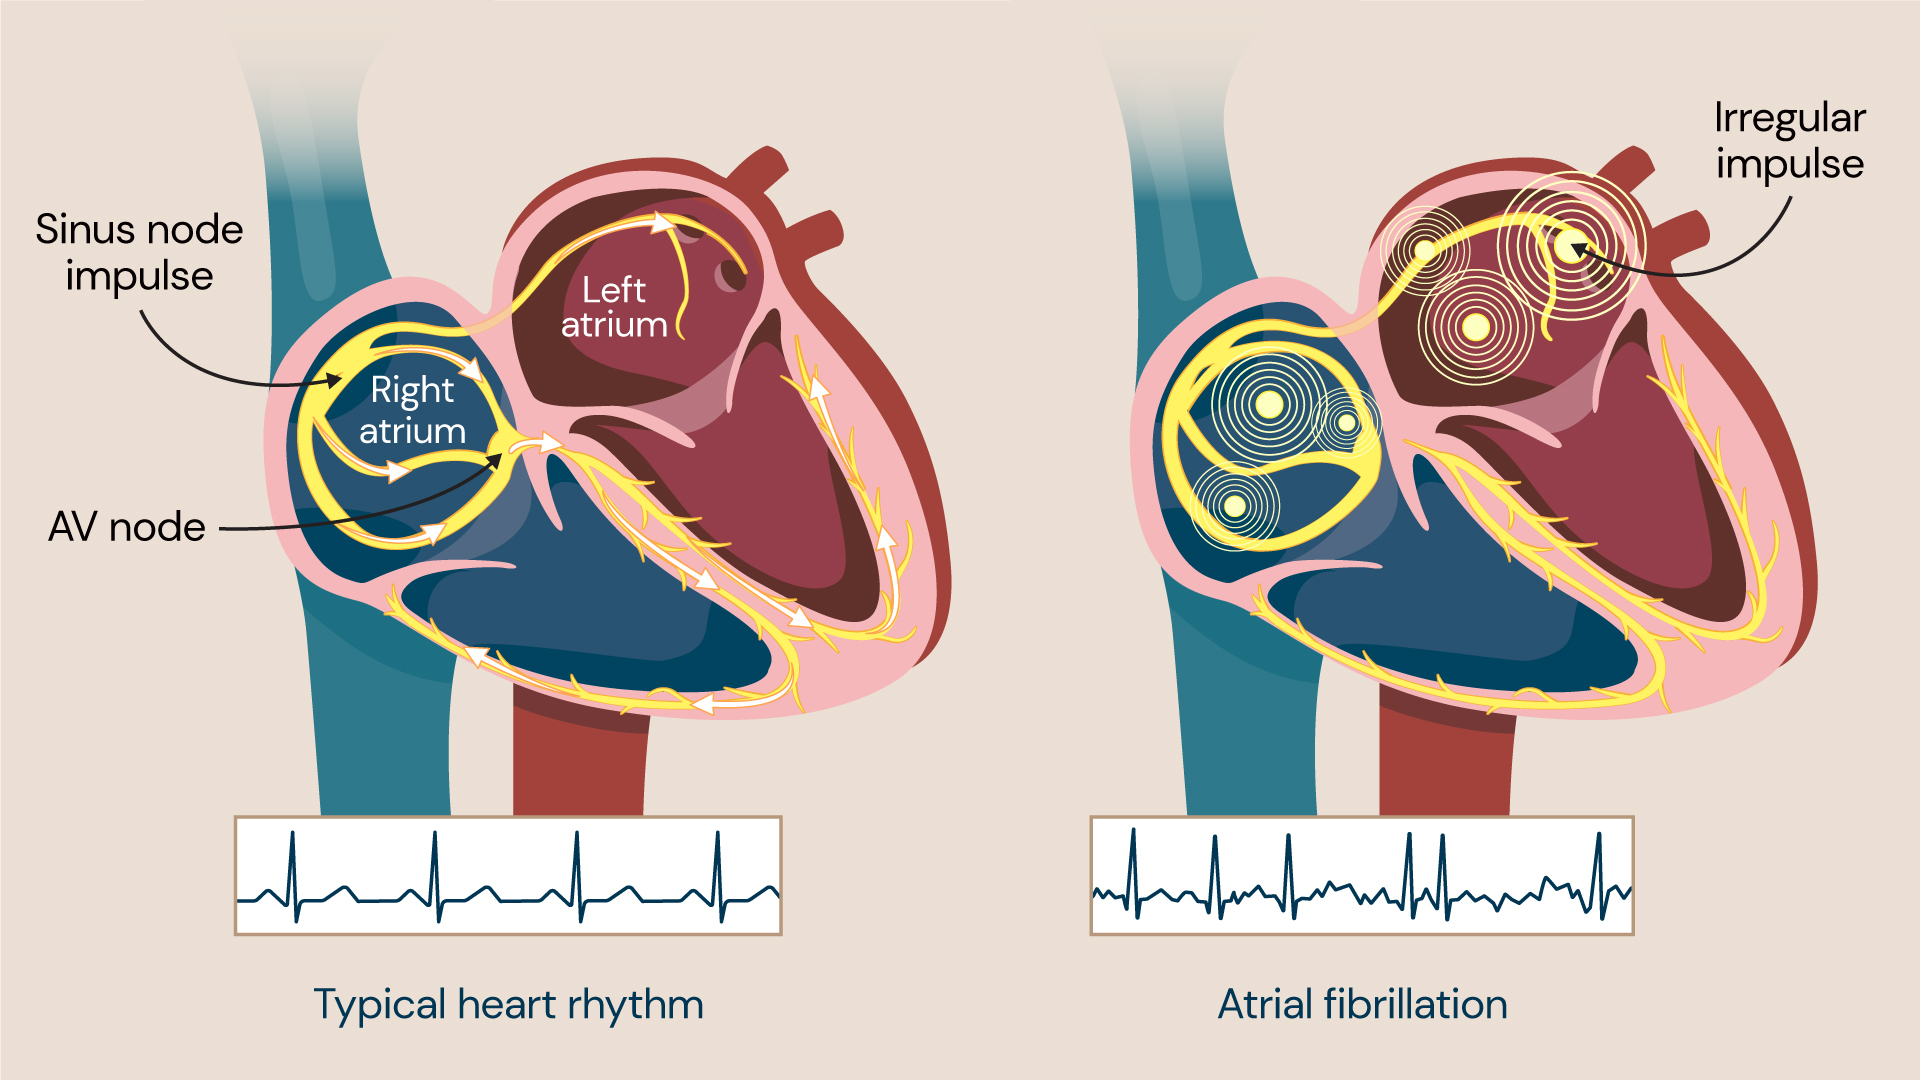 Atrial fibrillation occurs when the heart rhythm is irregular and either beats too fast or too slow. It is the most common arrhythmia.